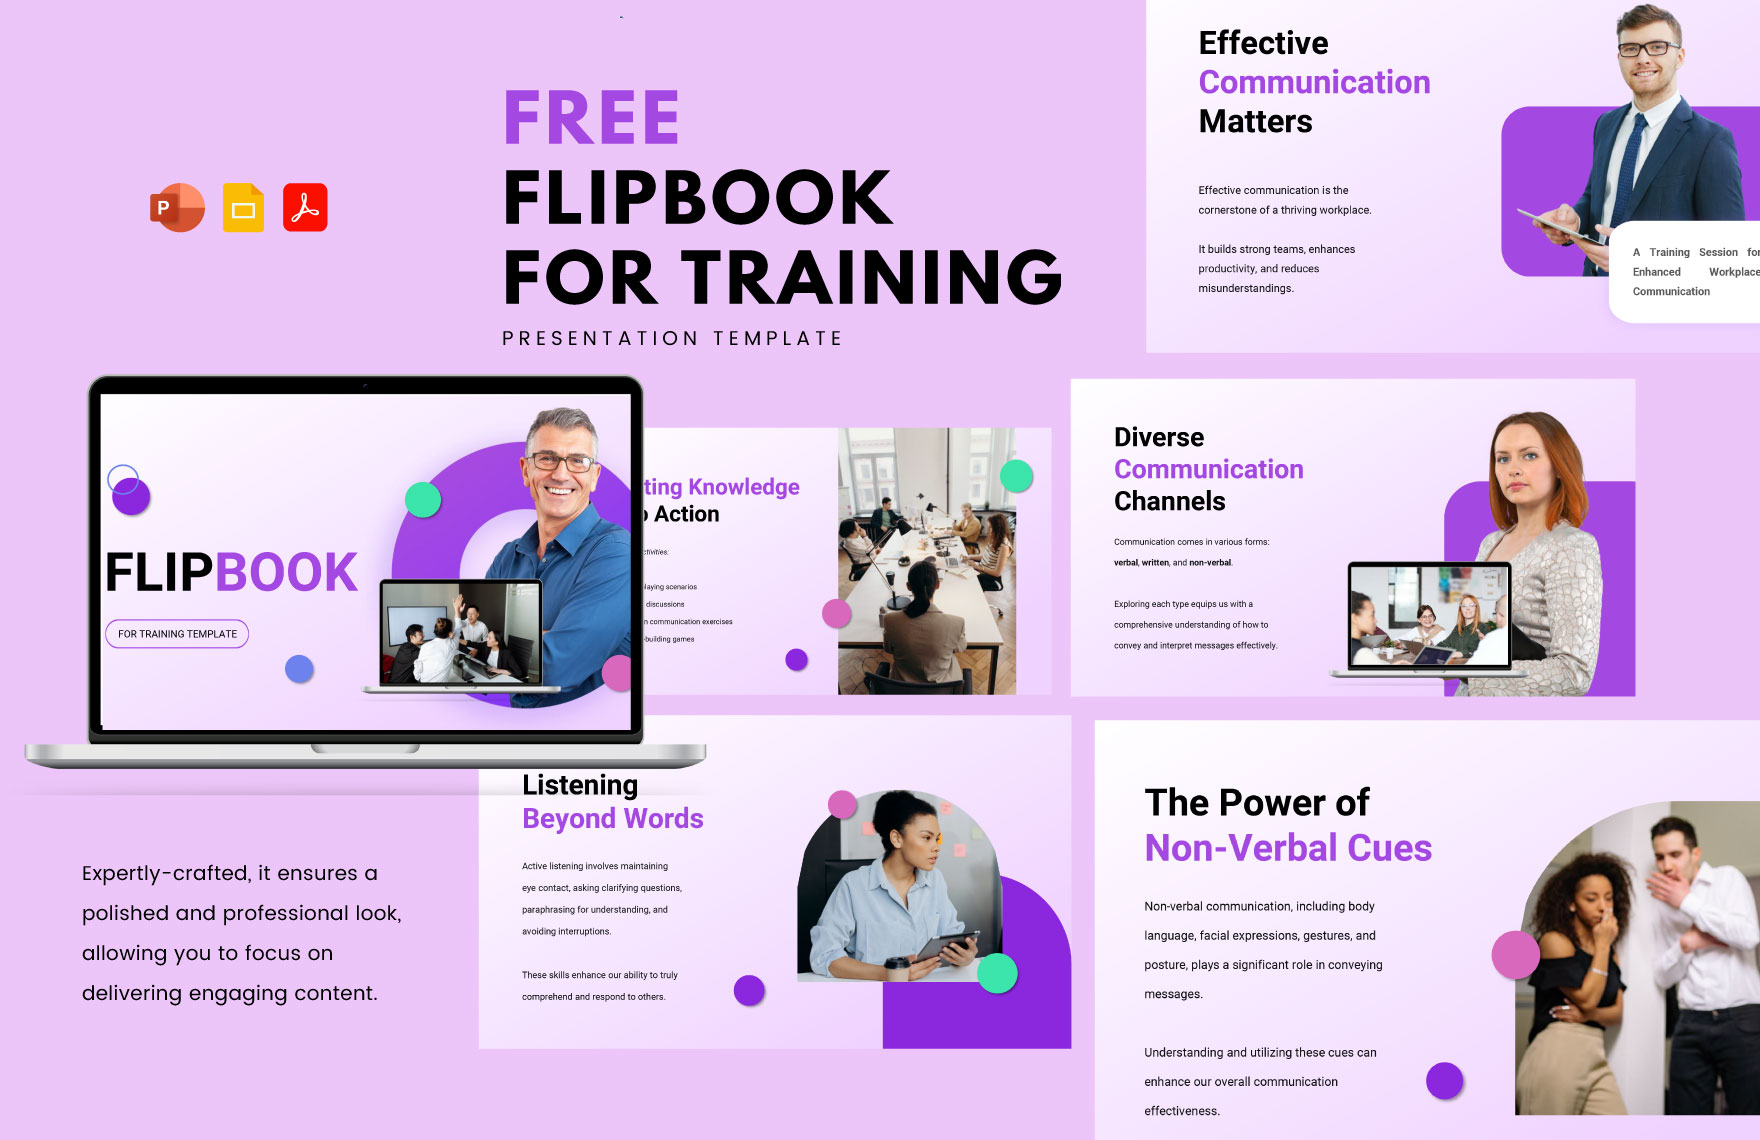 Flipbook for Training Template